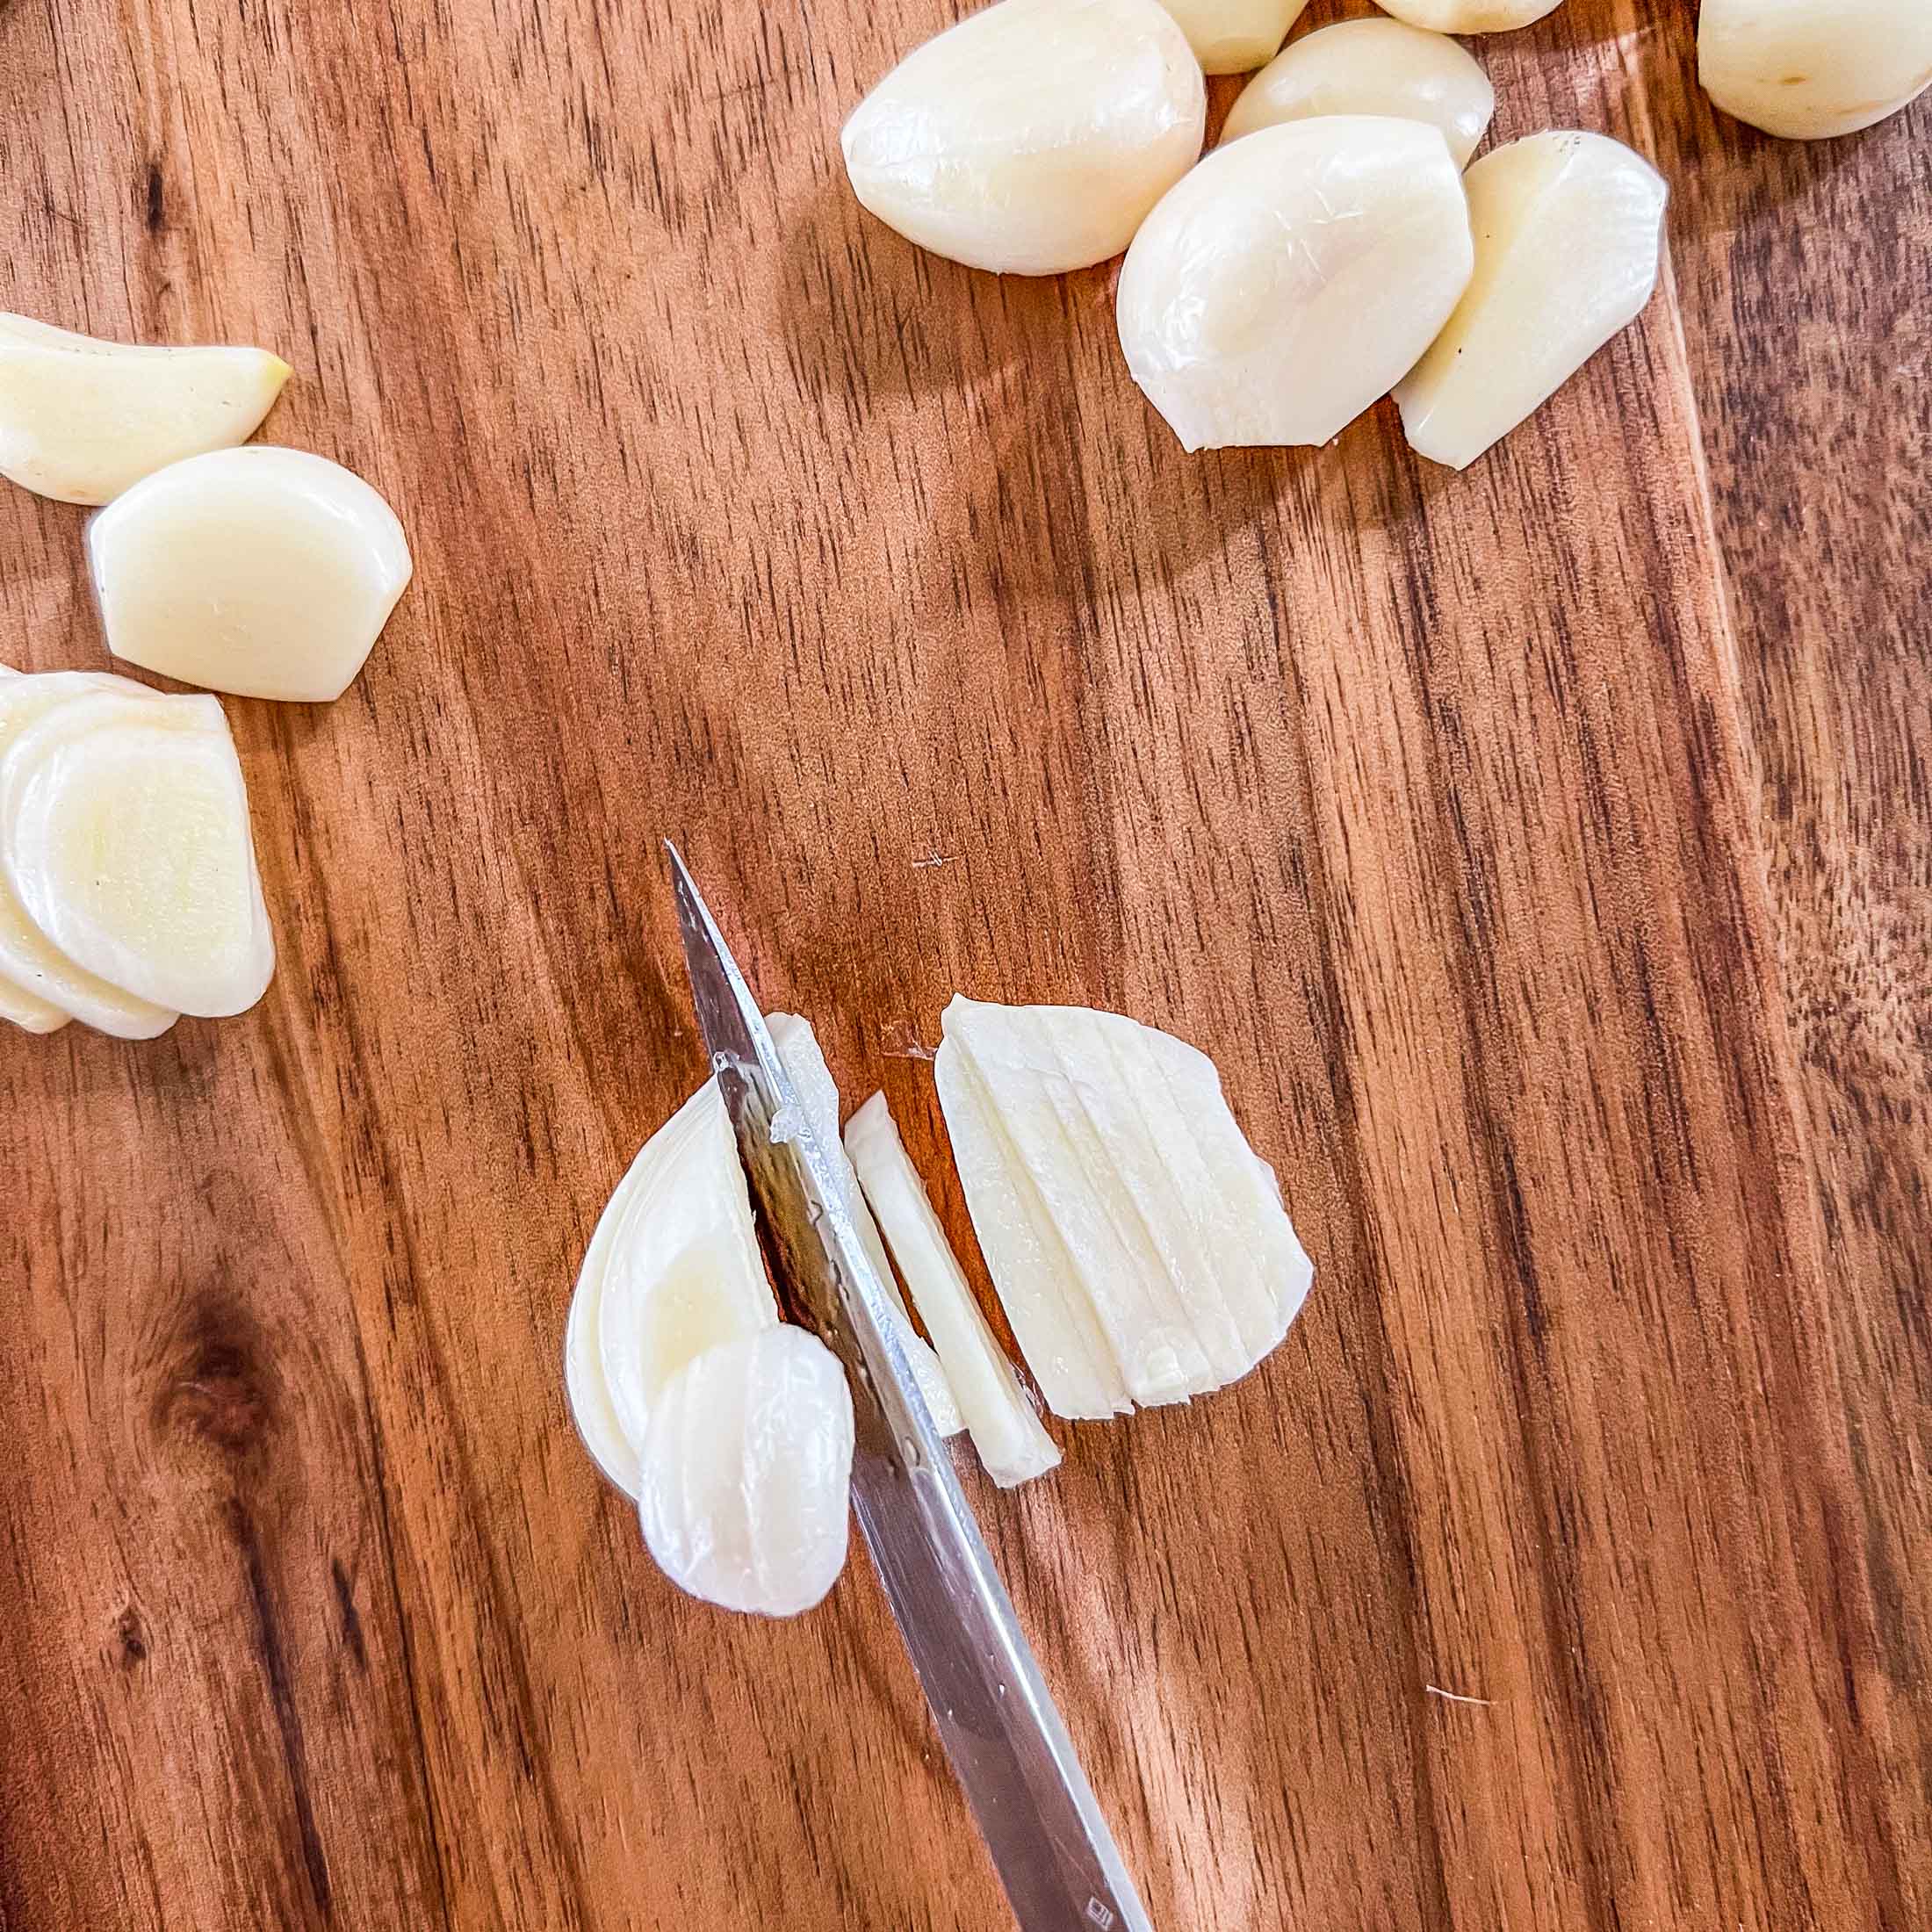 Finely cutting a clove of peeled garlic.